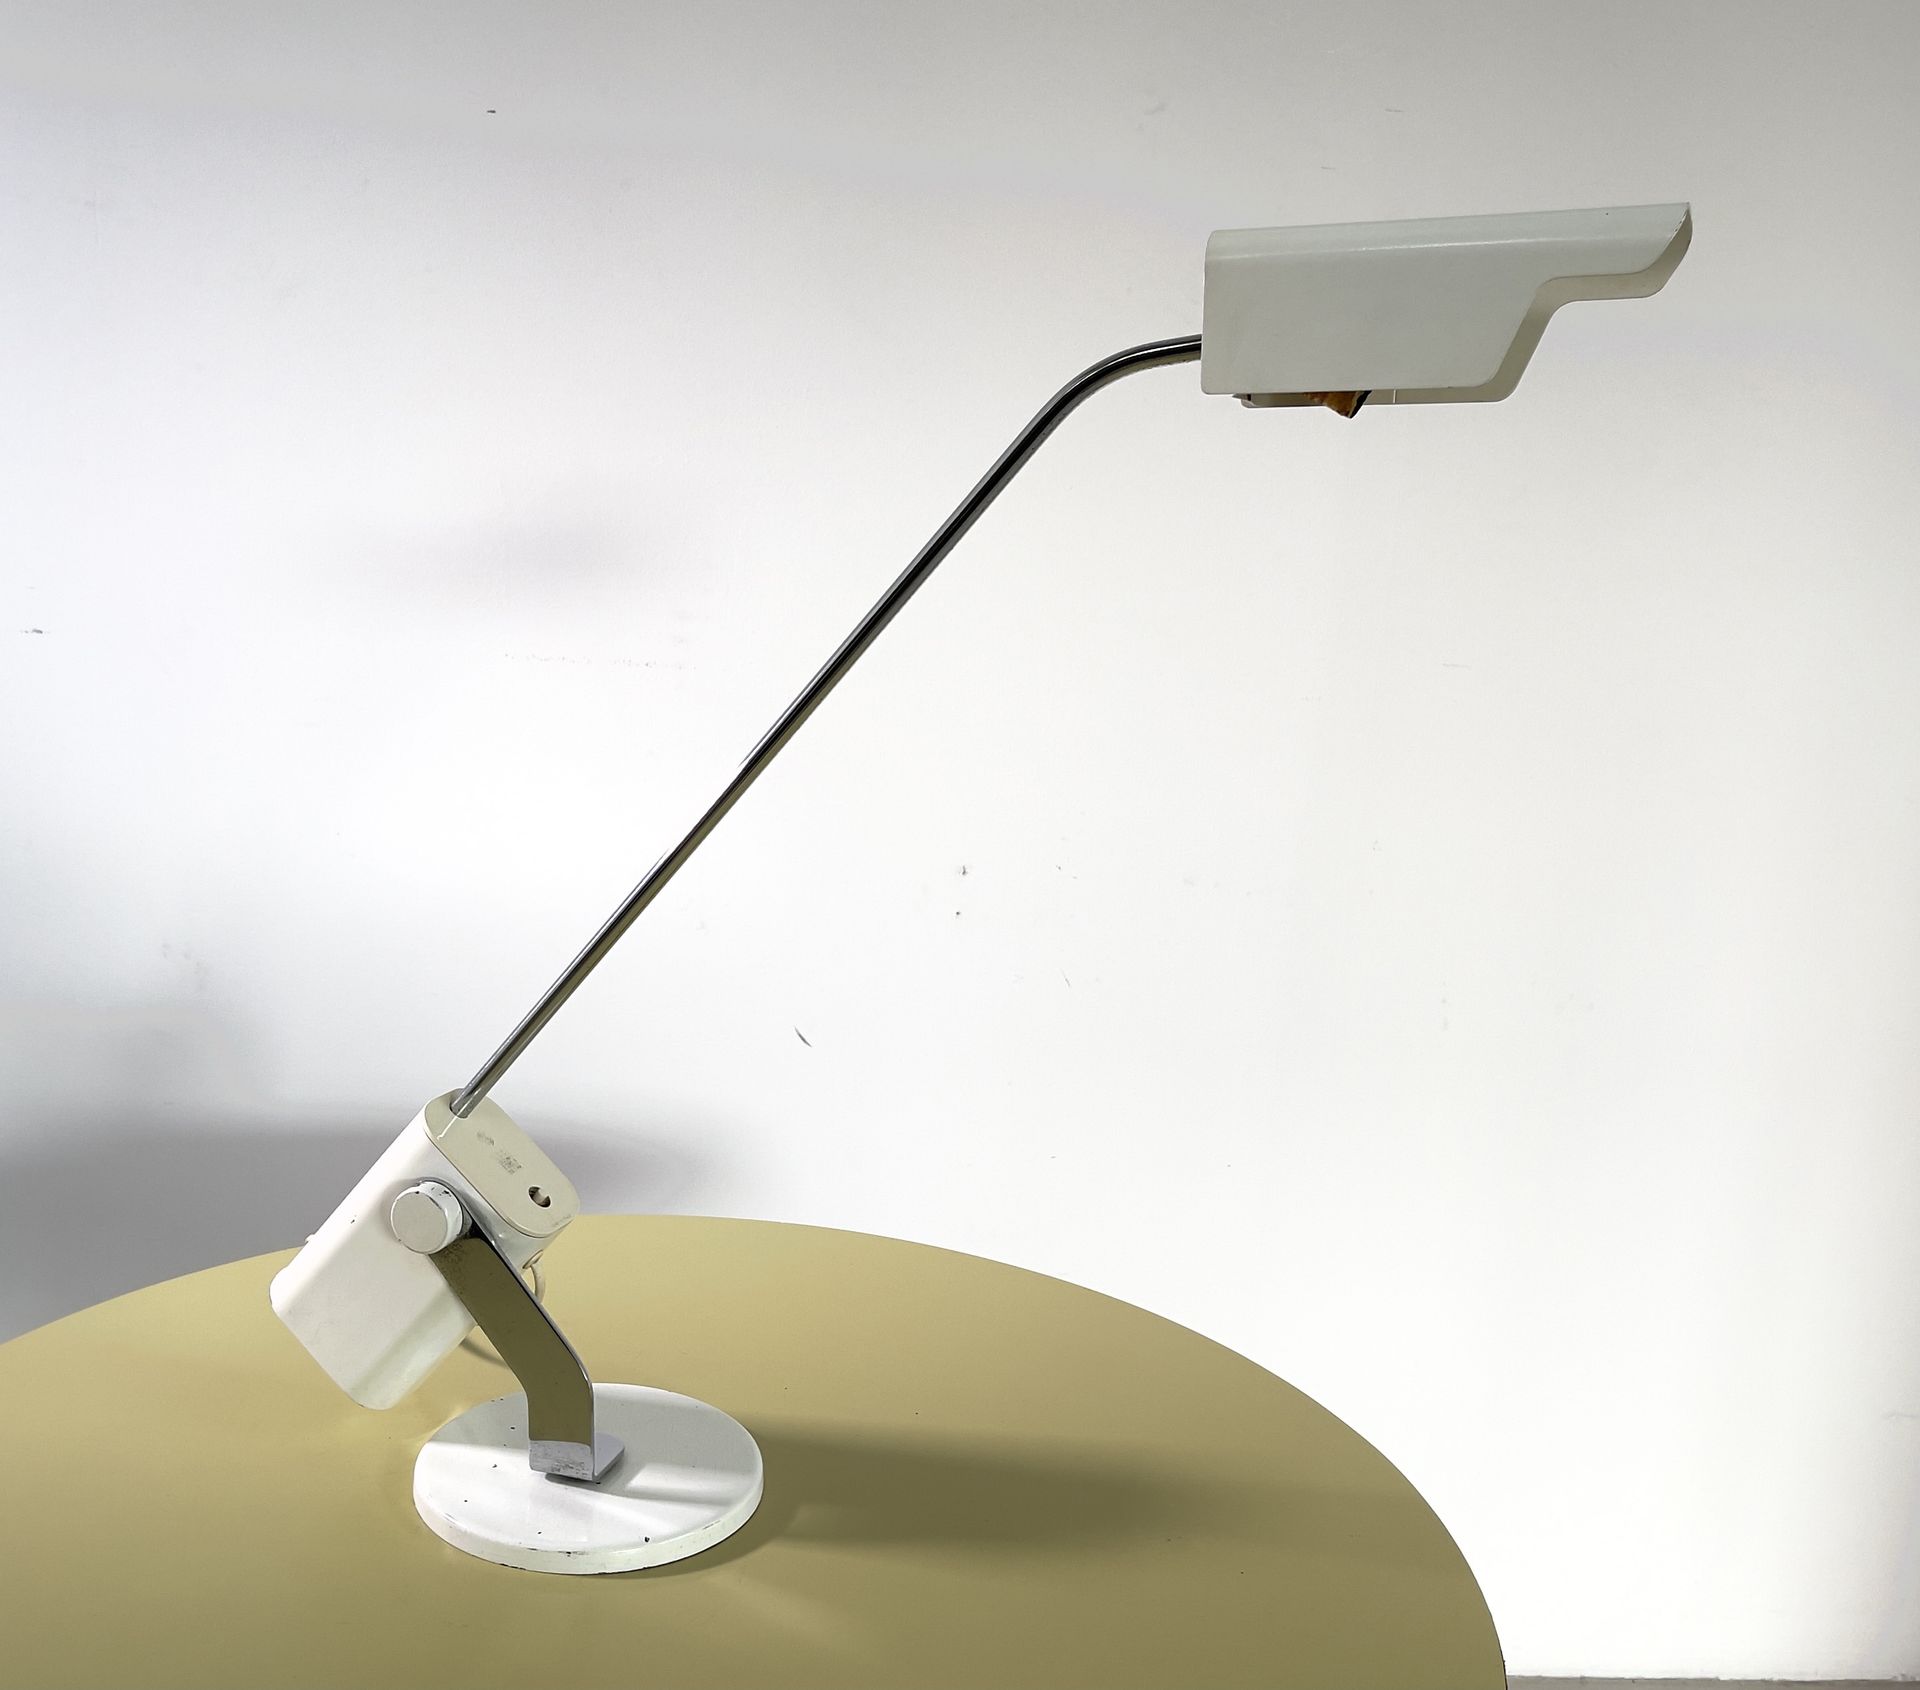 Model T442 Lamp from Luci Milano. 1970s T442型台灯，采用镀铬和白漆金属。LUCI生产。70s.措施。长85厘米，高7&hellip;